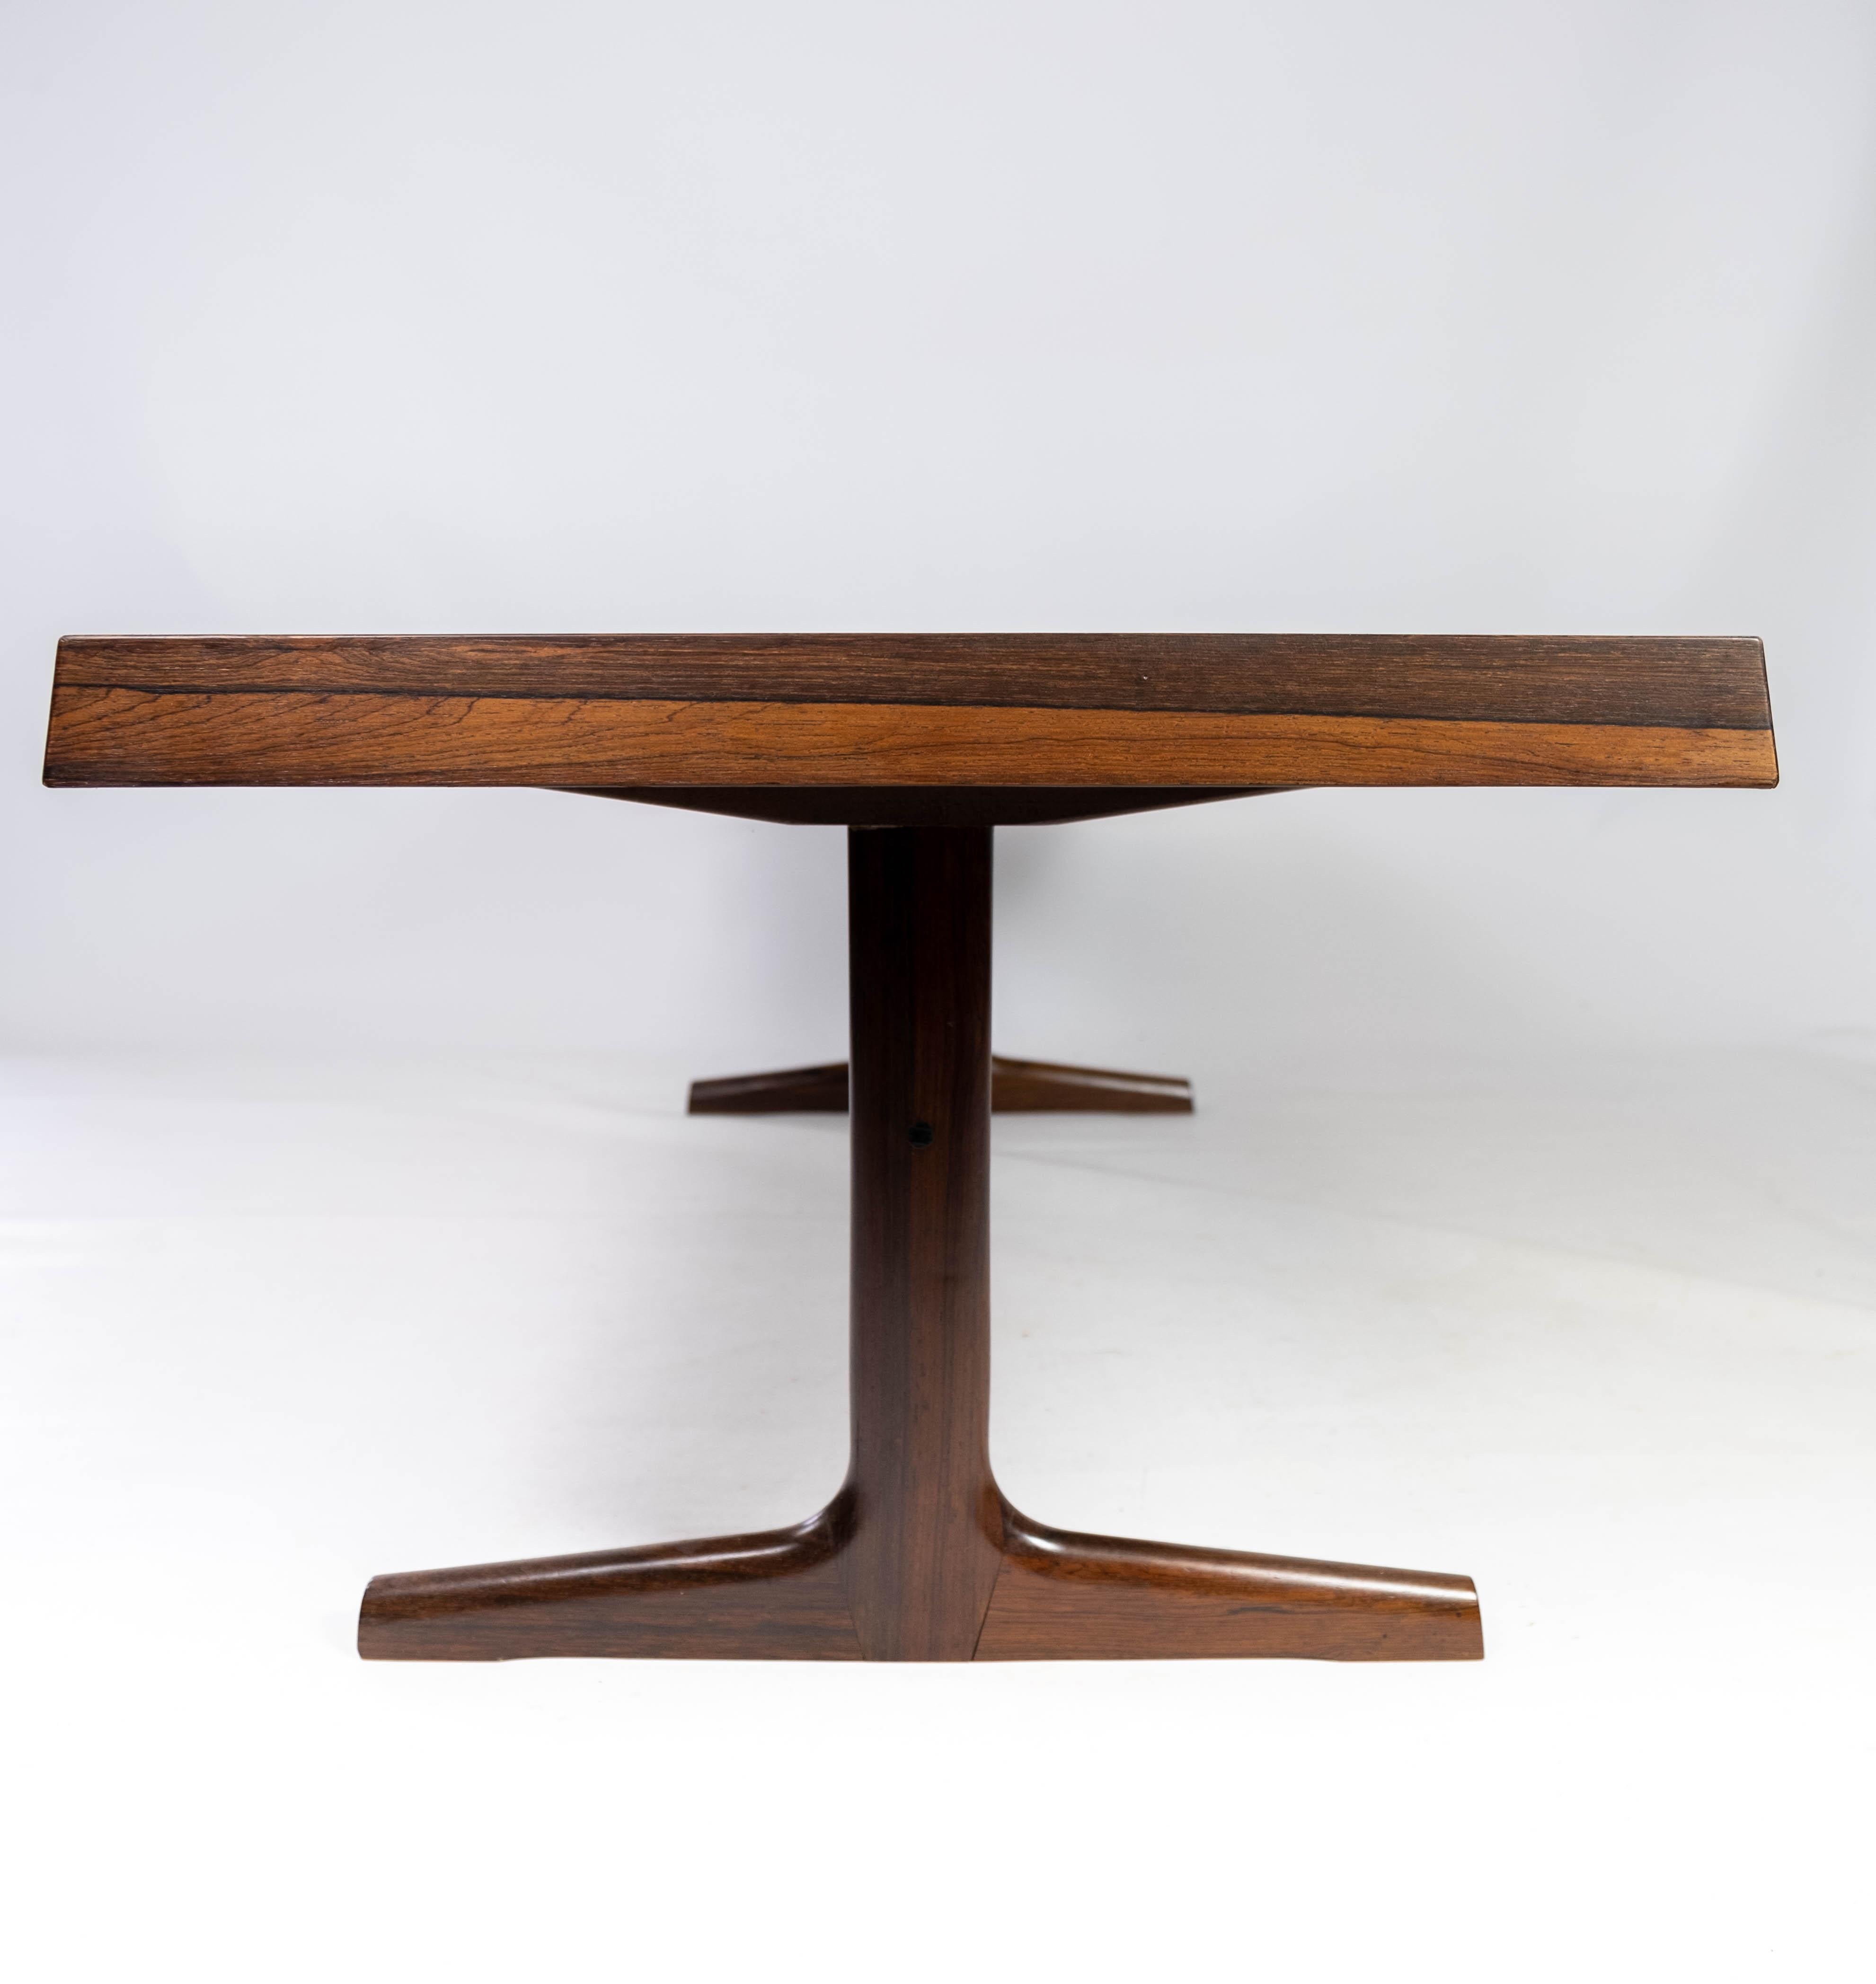 Coffee Table Made In Rosewood With Shaker Legs, Danish Design From 1960s For Sale 3